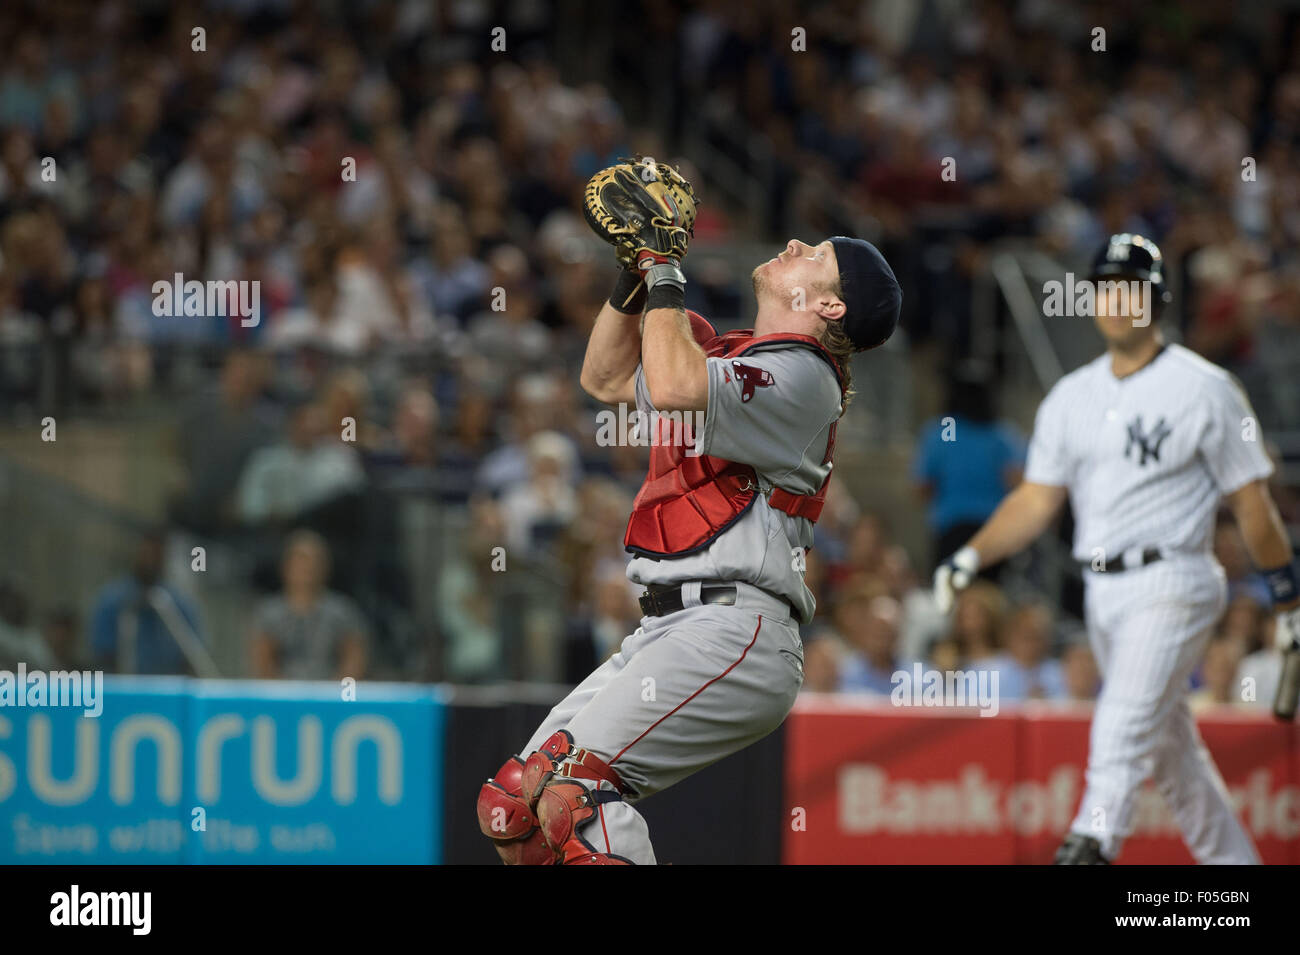 New York, New York, USA. 6th Aug, 2015. Yankees' MARK TEIXEIRA pops out in the 5th inning, New York Yankees vs. Boston Red Sox, Yankee Stadium, Thursday, August 6, 2015. Credit:  Bryan Smith/ZUMA Wire/Alamy Live News Stock Photo